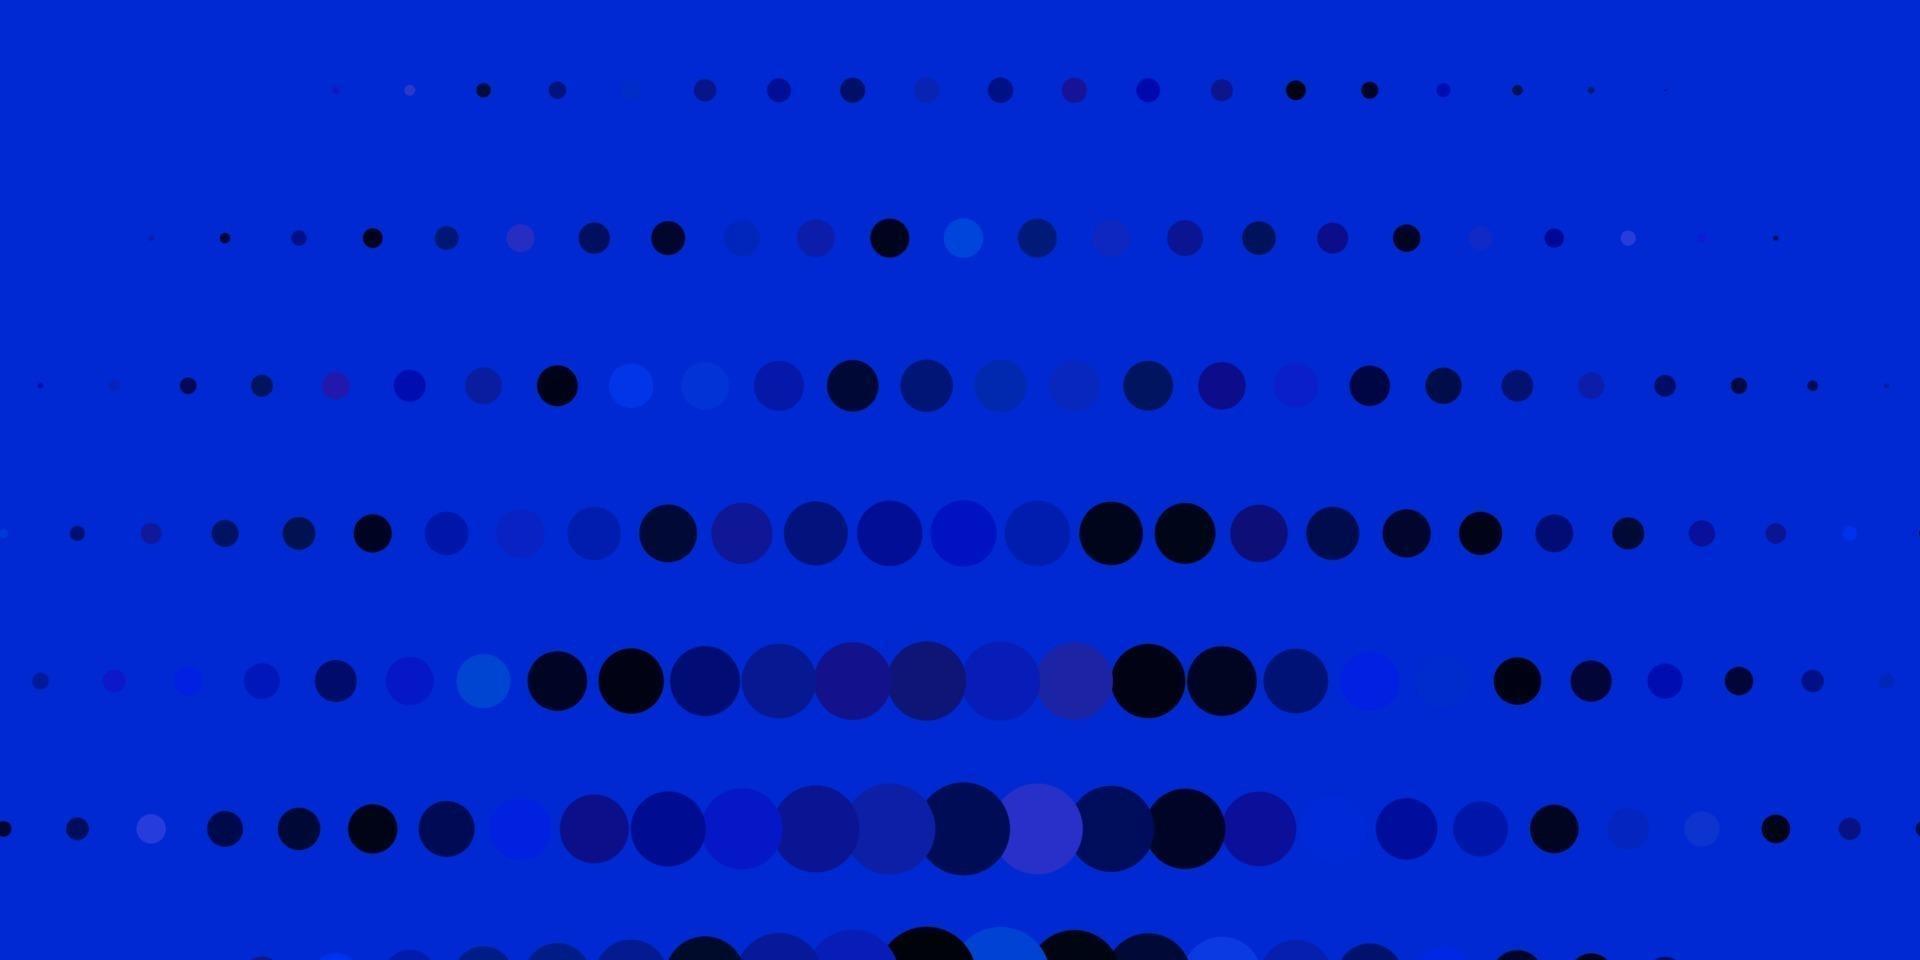 Dark Pink, Blue vector template with circles.